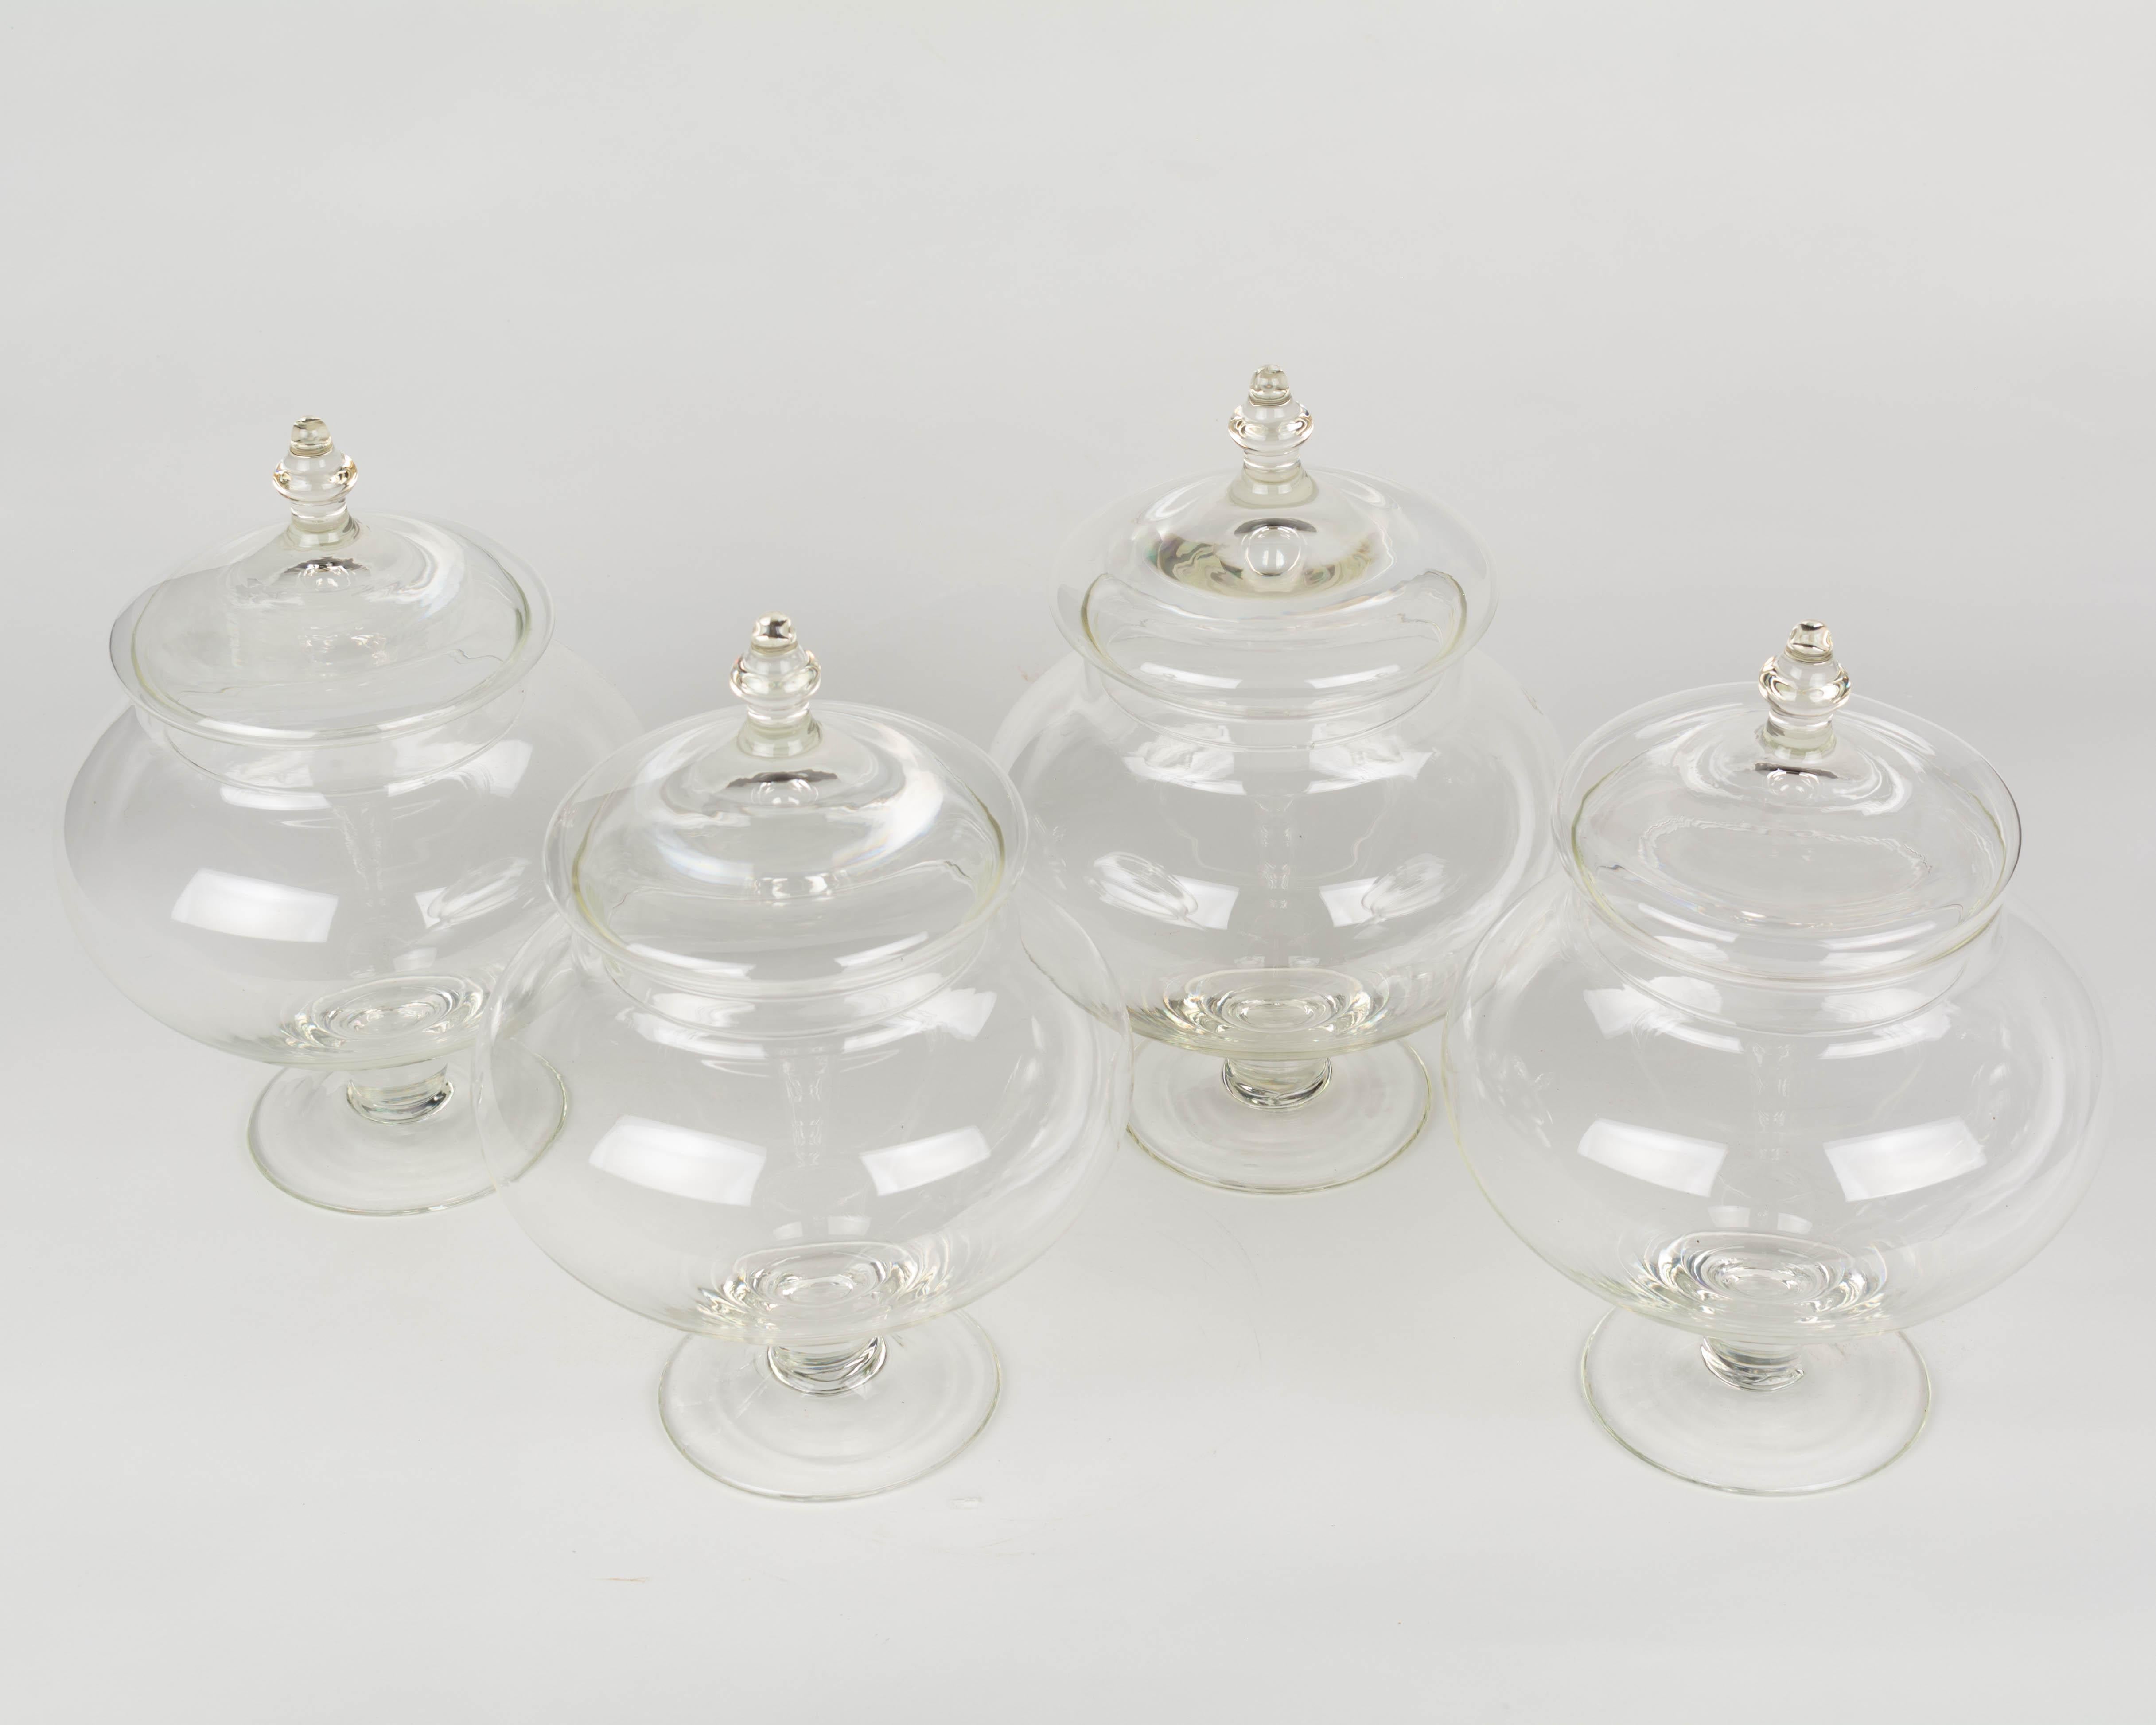 French Glass Apothecary Jars, Set of 4 In Good Condition For Sale In Winter Park, FL